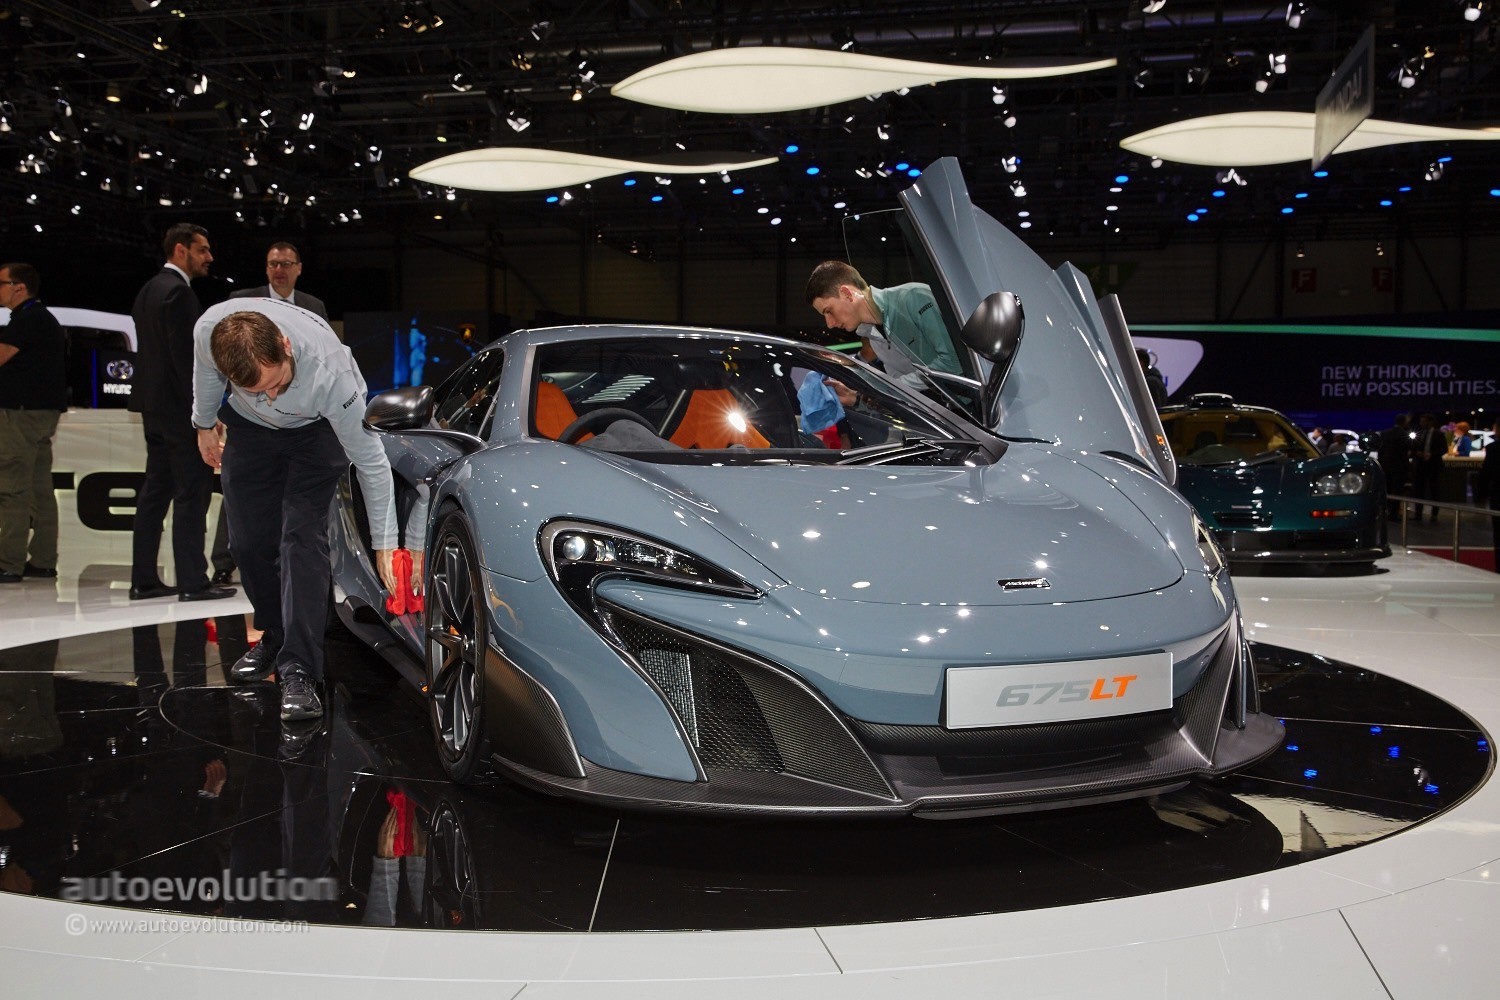 mclaren-675lt-is-a-longtail-supercar-for-the-track-in-geneva-video-live-photos_15